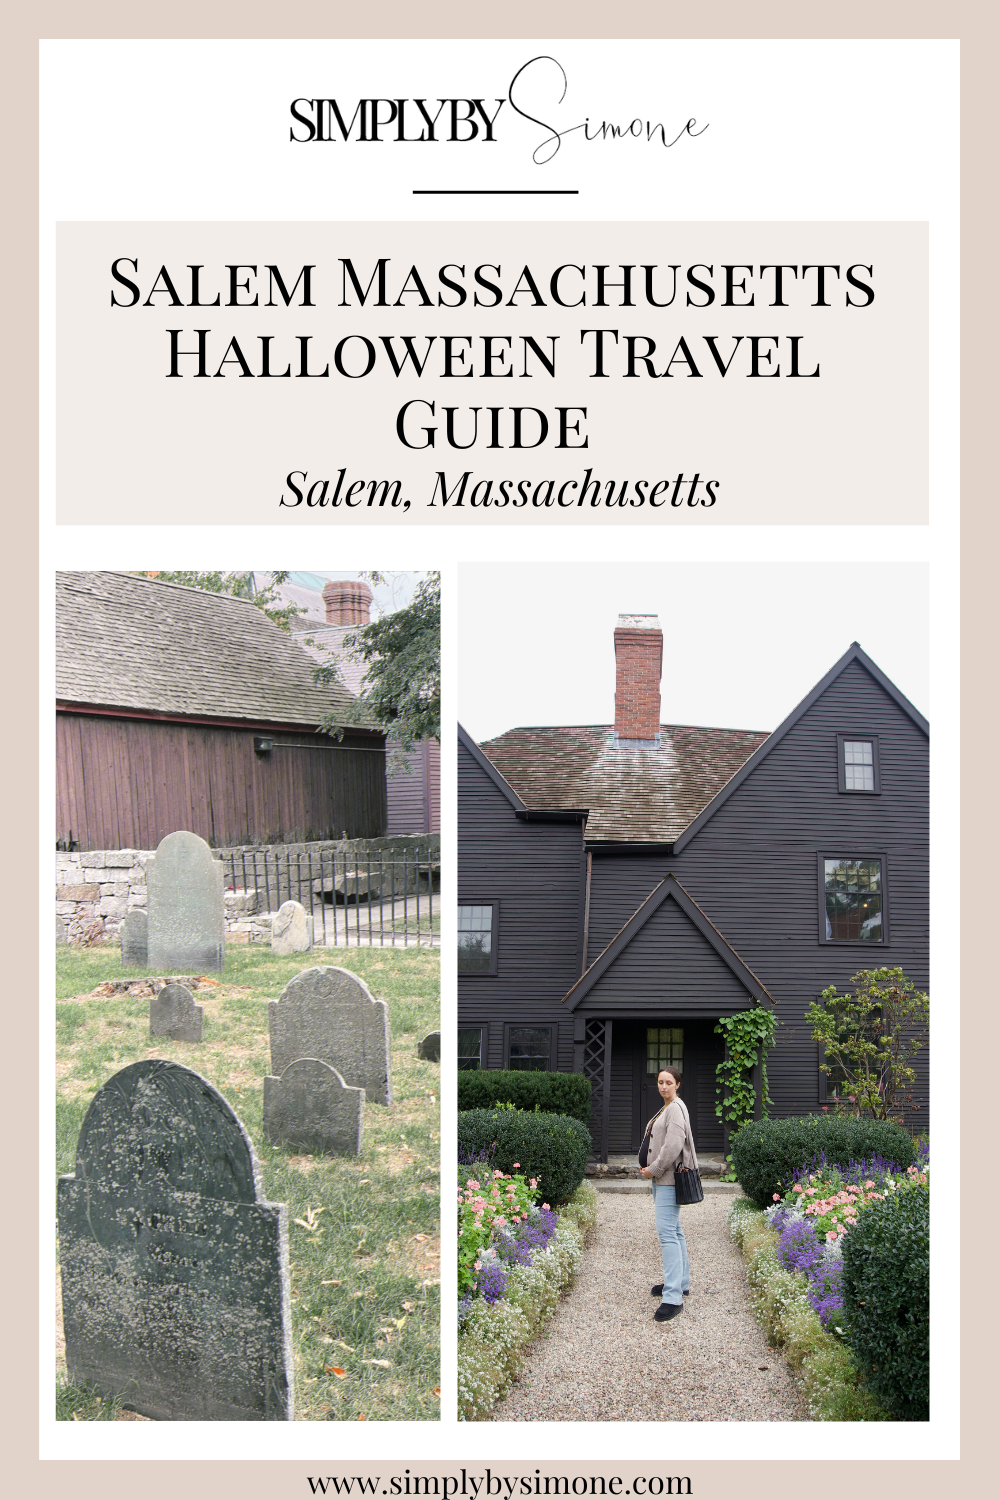 Salem Massachusetts Halloween Travel Guide | Girls Trip to Salem Massachusetts | 48 Hours in Salem Massachusetts | Salem MA | Witch City | Salem Witch City | The Perfect Salem Itinerary | Best Things To Do in Salem Massachusetts | Two Days in Salem Massachusetts | Salem Travel Guide | Halloween Travel Guide | Things to Do In Salem Massachusetts | Salem Travel Guide | Cover Image | Simply by Simone 